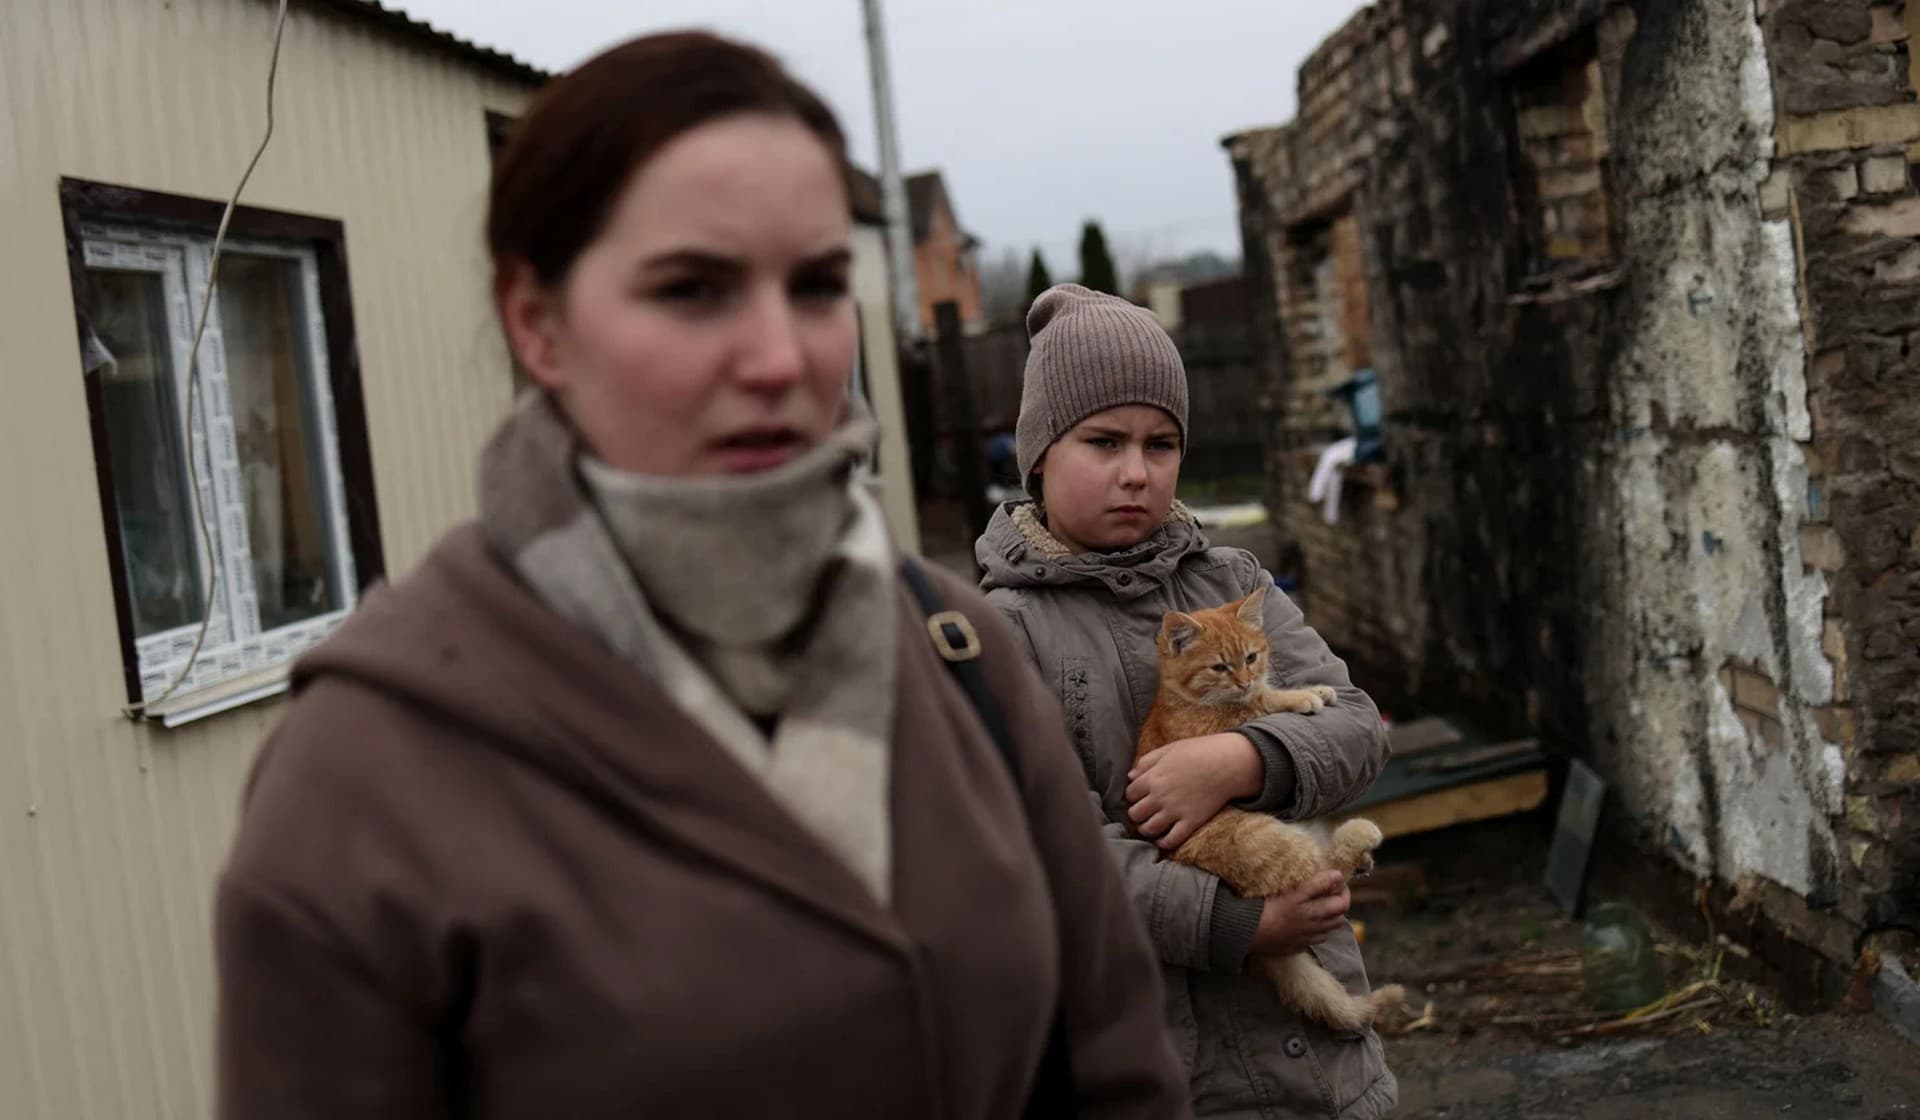 Kateryna Tyshchenko, accompanied by her 9-year-old half-sister Yuliia Zaika, stands outside her prefabricated accommodation which was built next to her destroyed house in the village of Moshchun